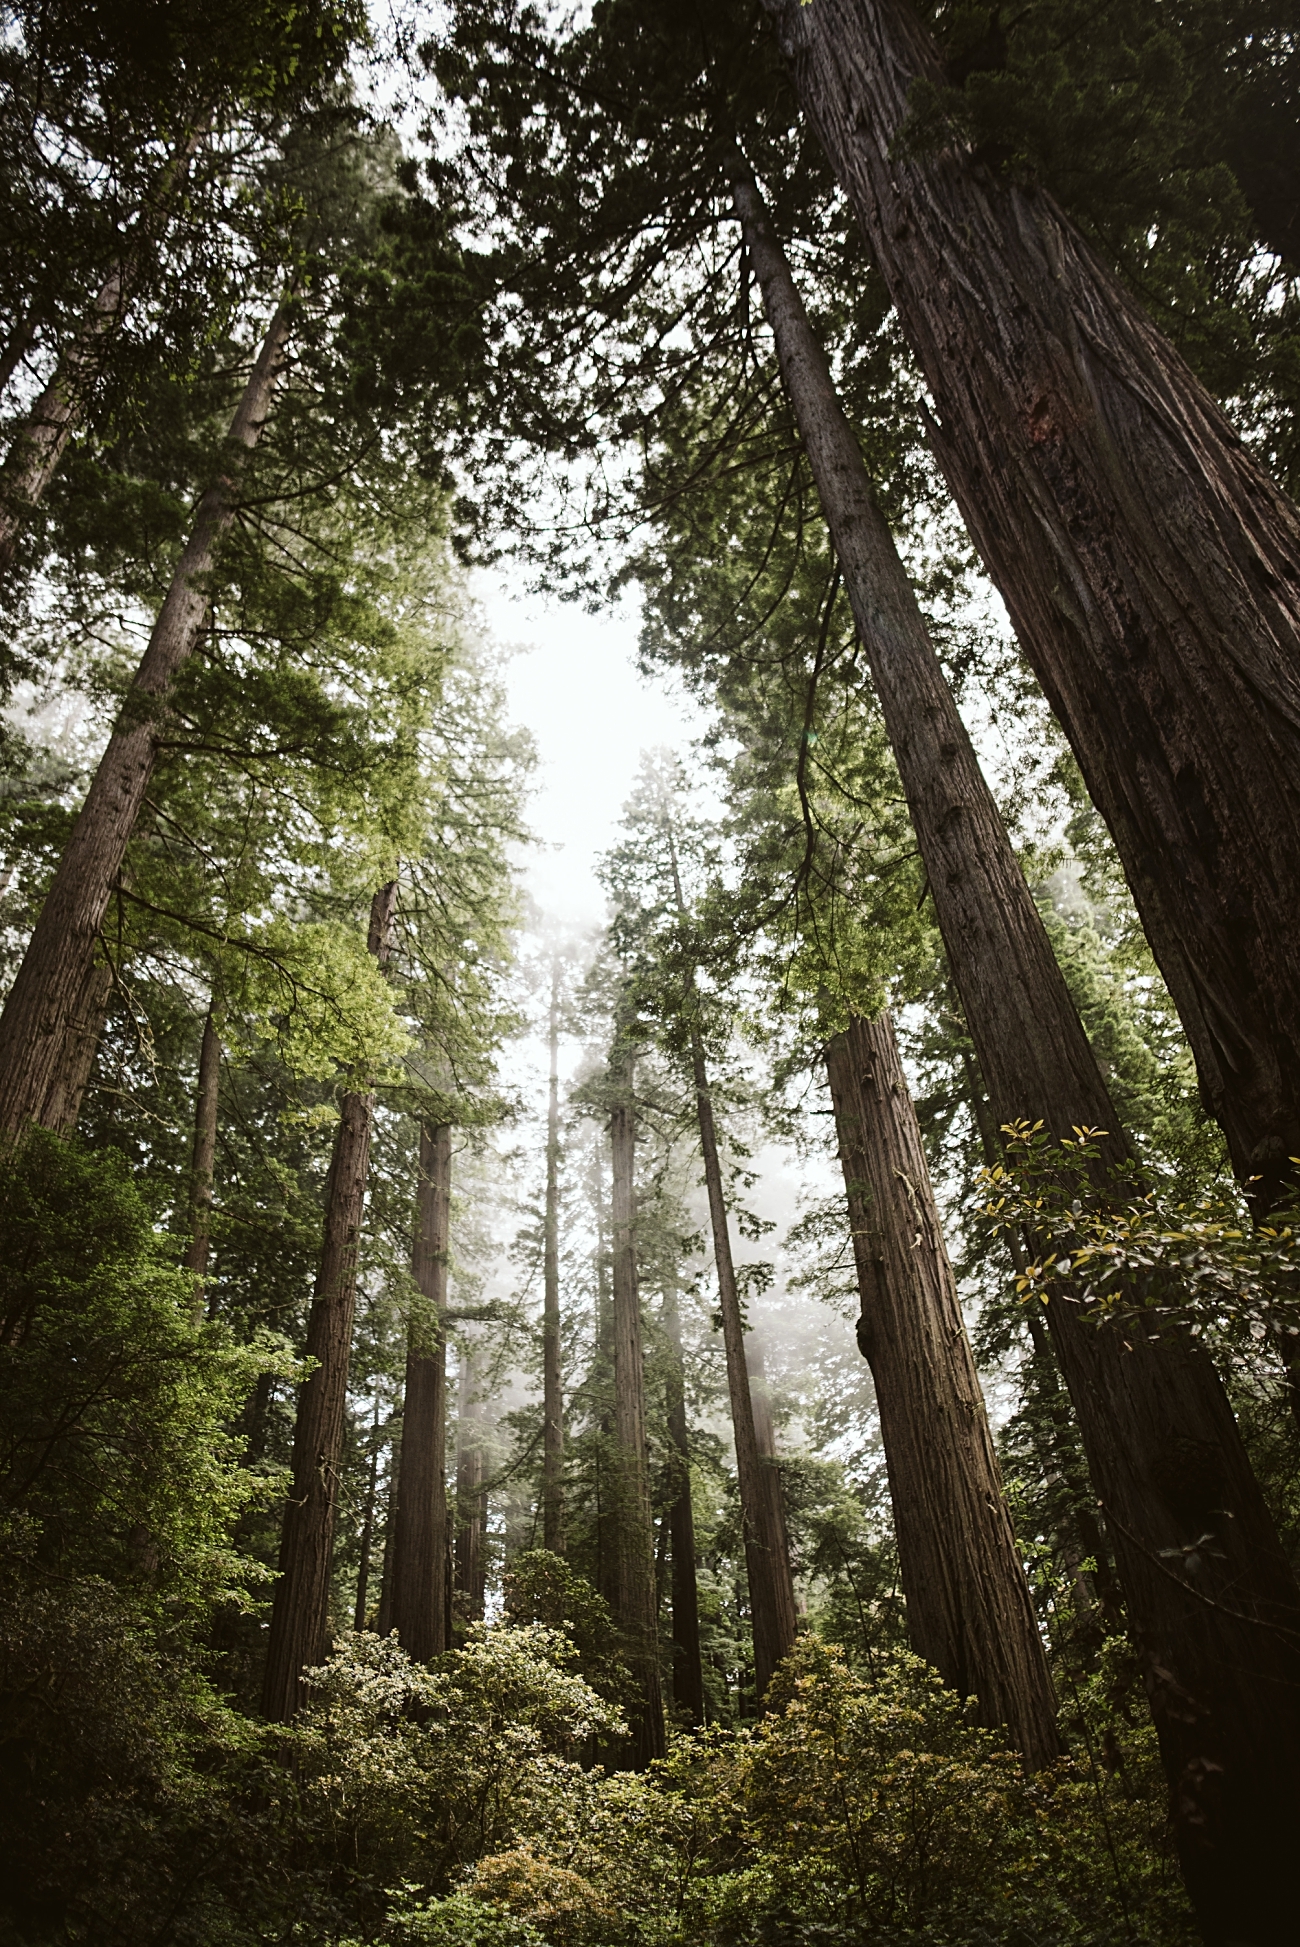 Camping in Redwoods National Park, Redwoods Travel Guide, Travel Photographer